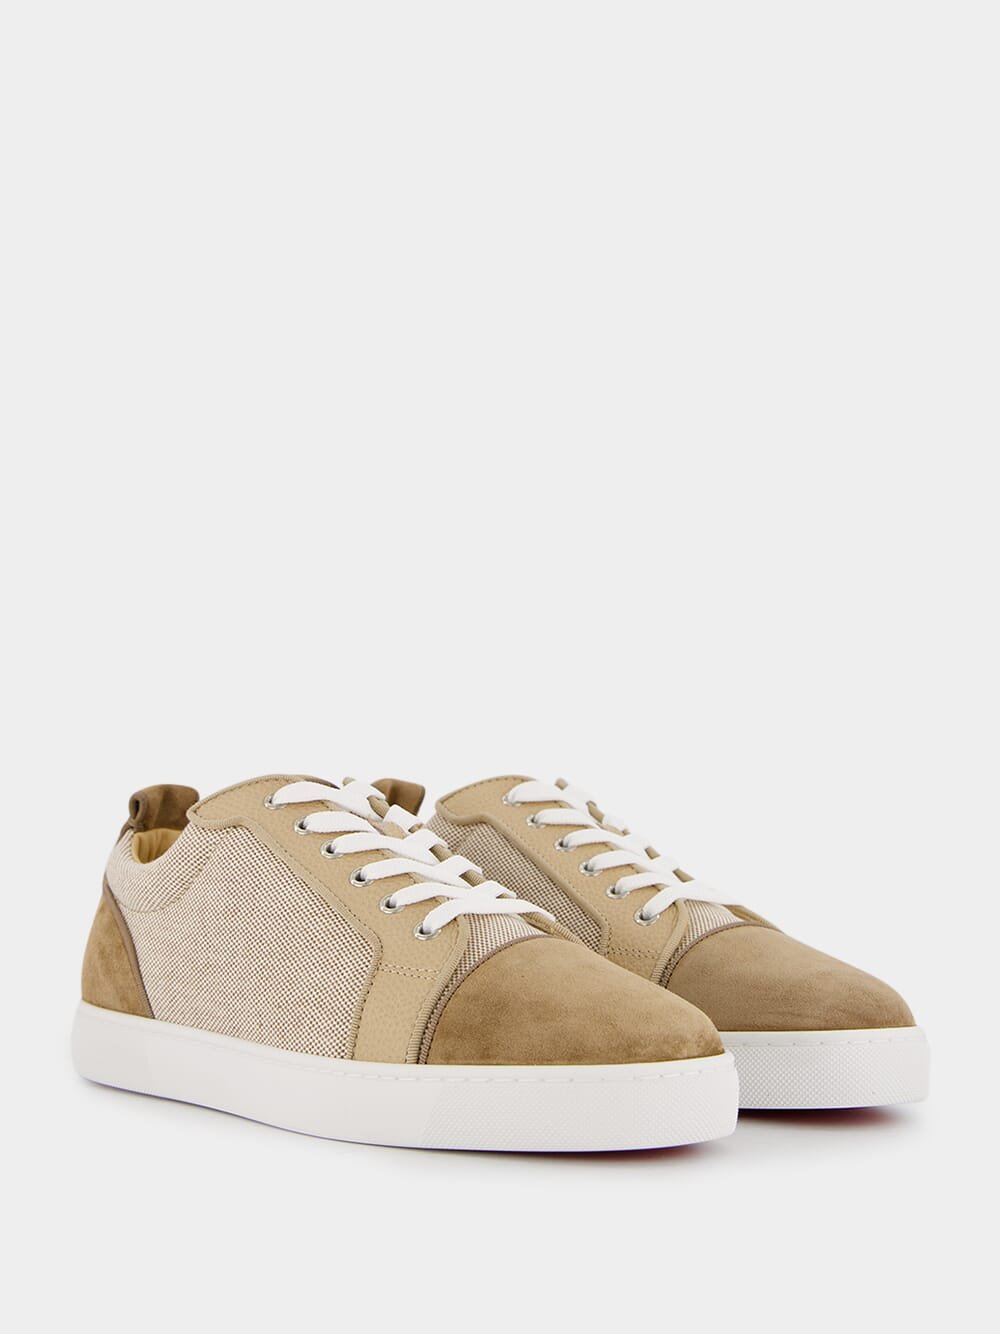 Christian LouboutinLouis Junior Suede Sneakers at Fashion Clinic